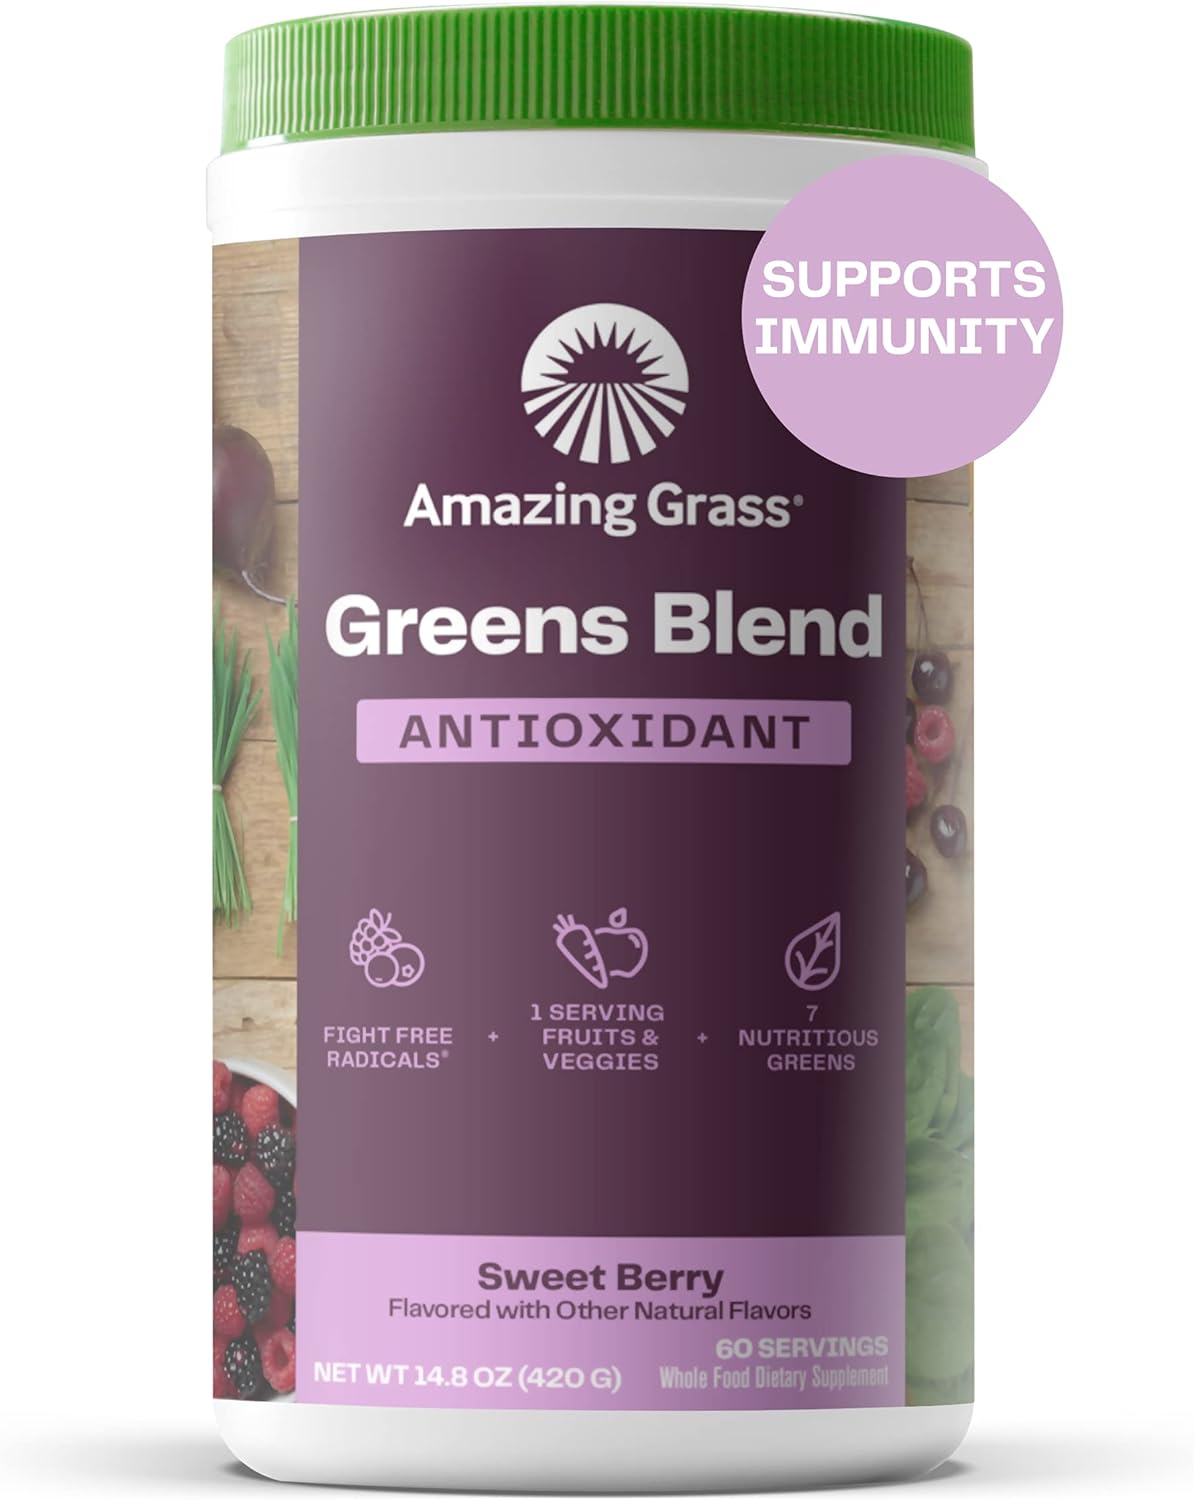 Amazing Grass Greens Blend Antioxidant: Super Greens Powder Smoothie Mix with Organic Spirulina, Beet Root Powder, Elderberry Probiotics, Sweet Berry, 60 Servings (Packaging May Vary)